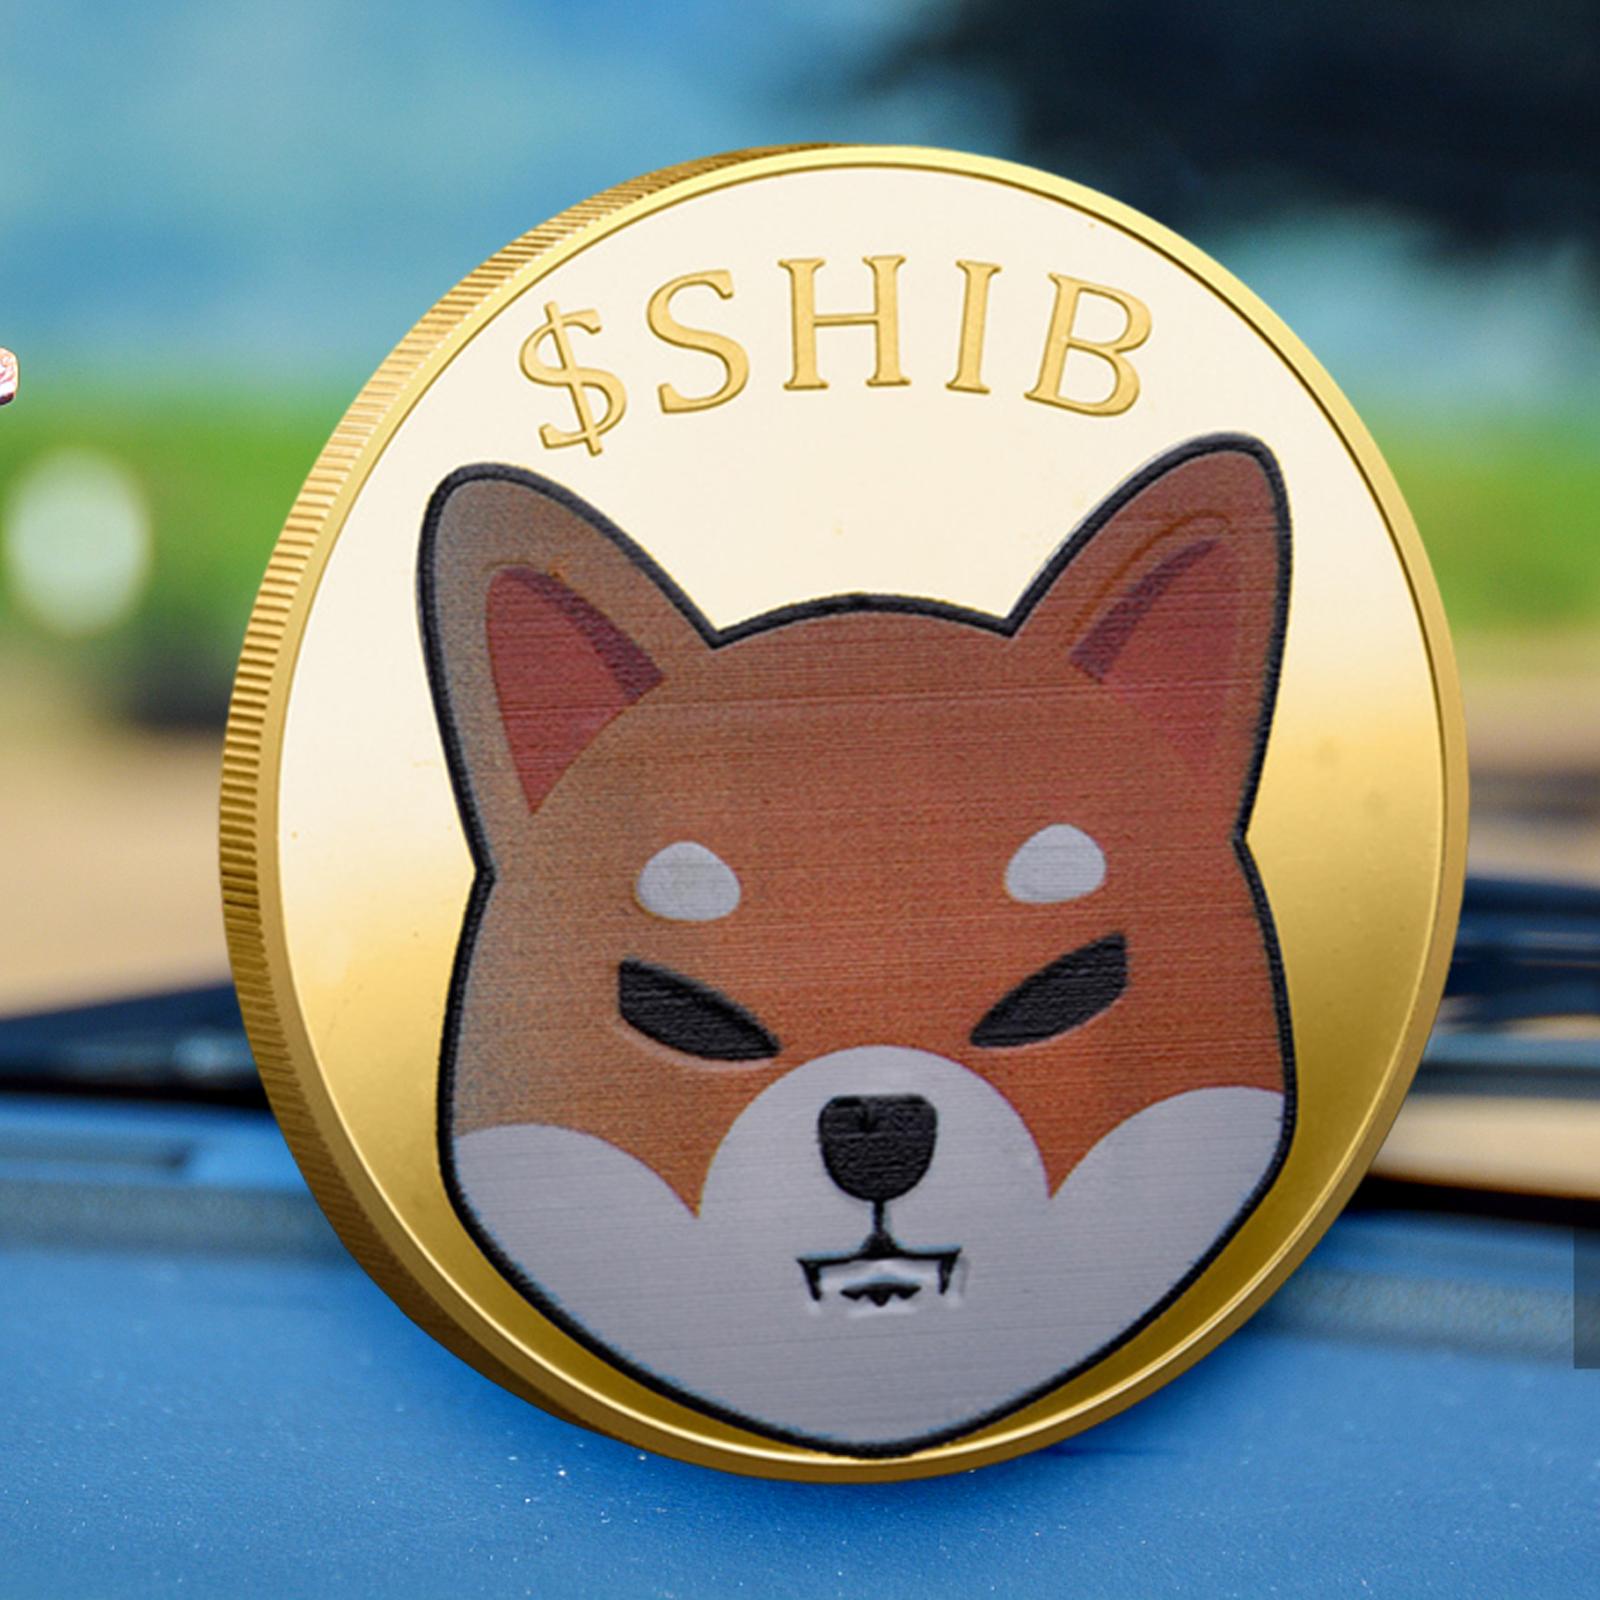 Gold Dogecoin Commemorative Coin 2021 Doge Coin New Collectors Iron Plated Coin with Protective Case for Friend Gift 40mm Dia